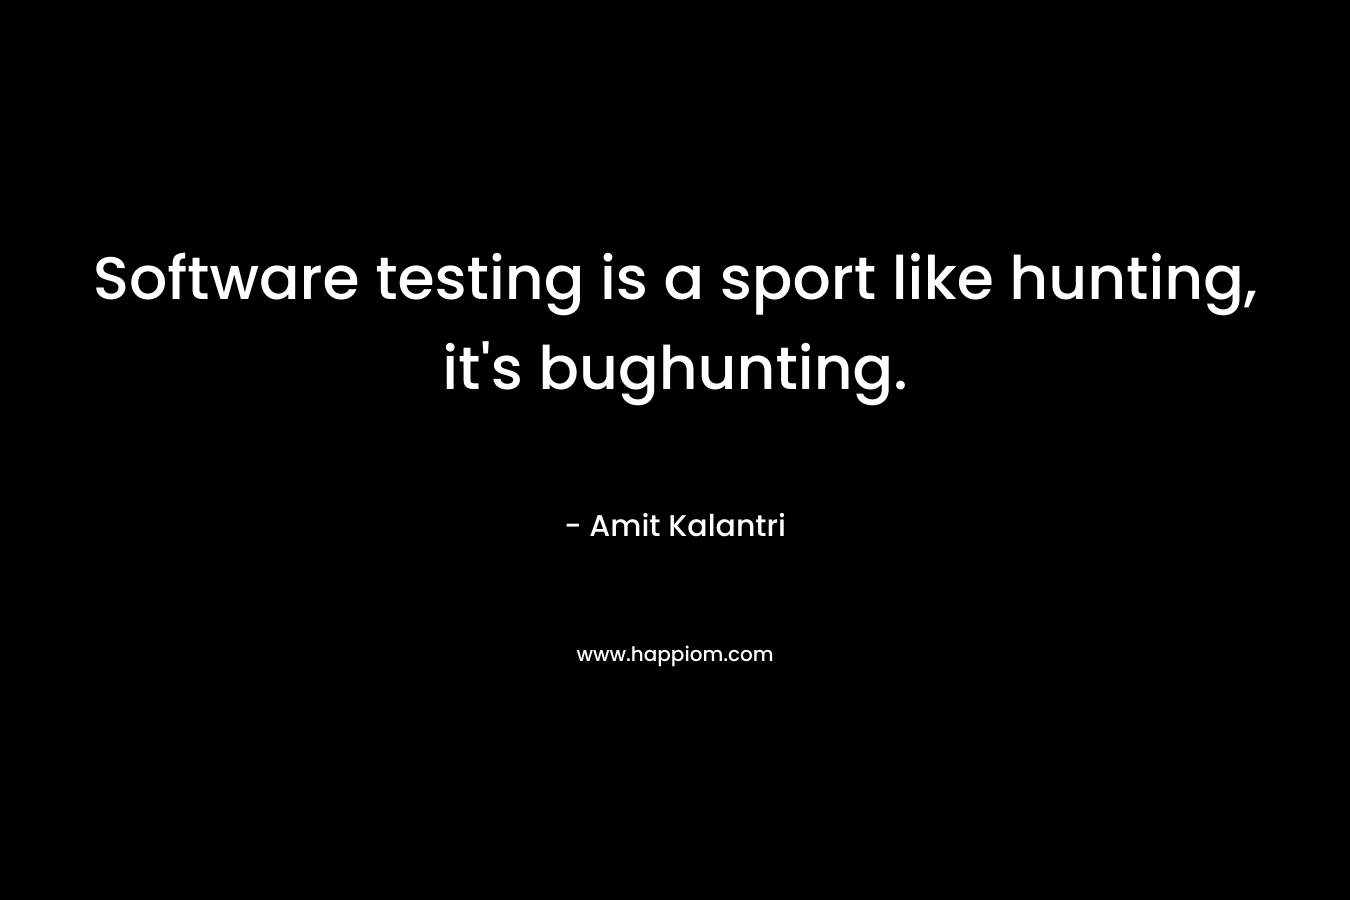 Software testing is a sport like hunting, it’s bughunting. – Amit Kalantri